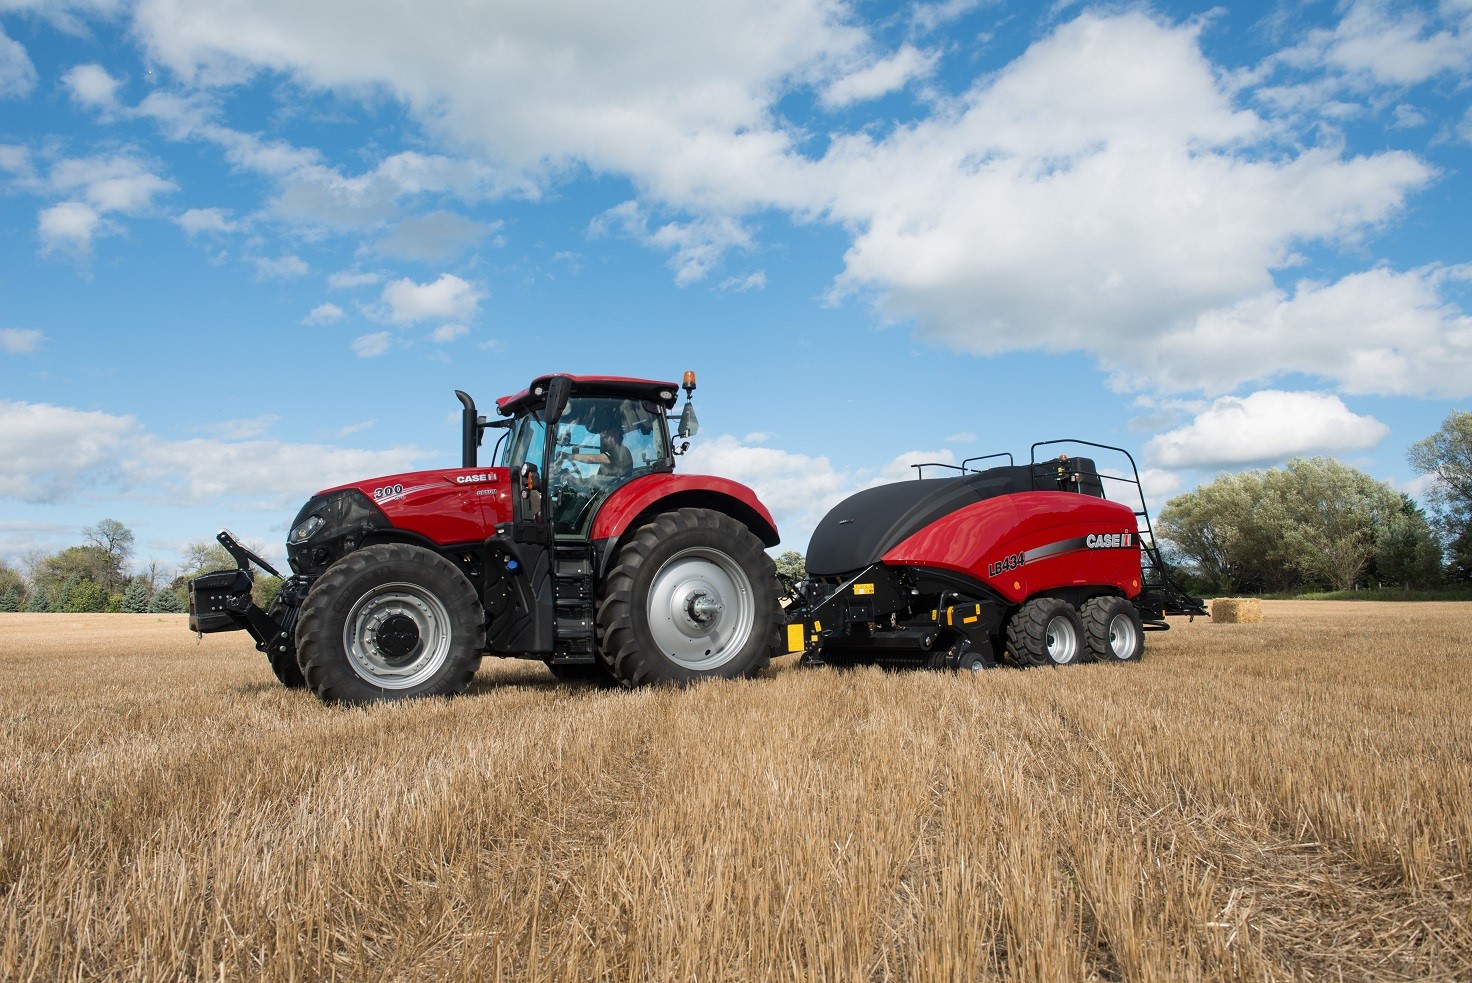 New ISOBUS Class 3 of use for the LB4 series of large square balers